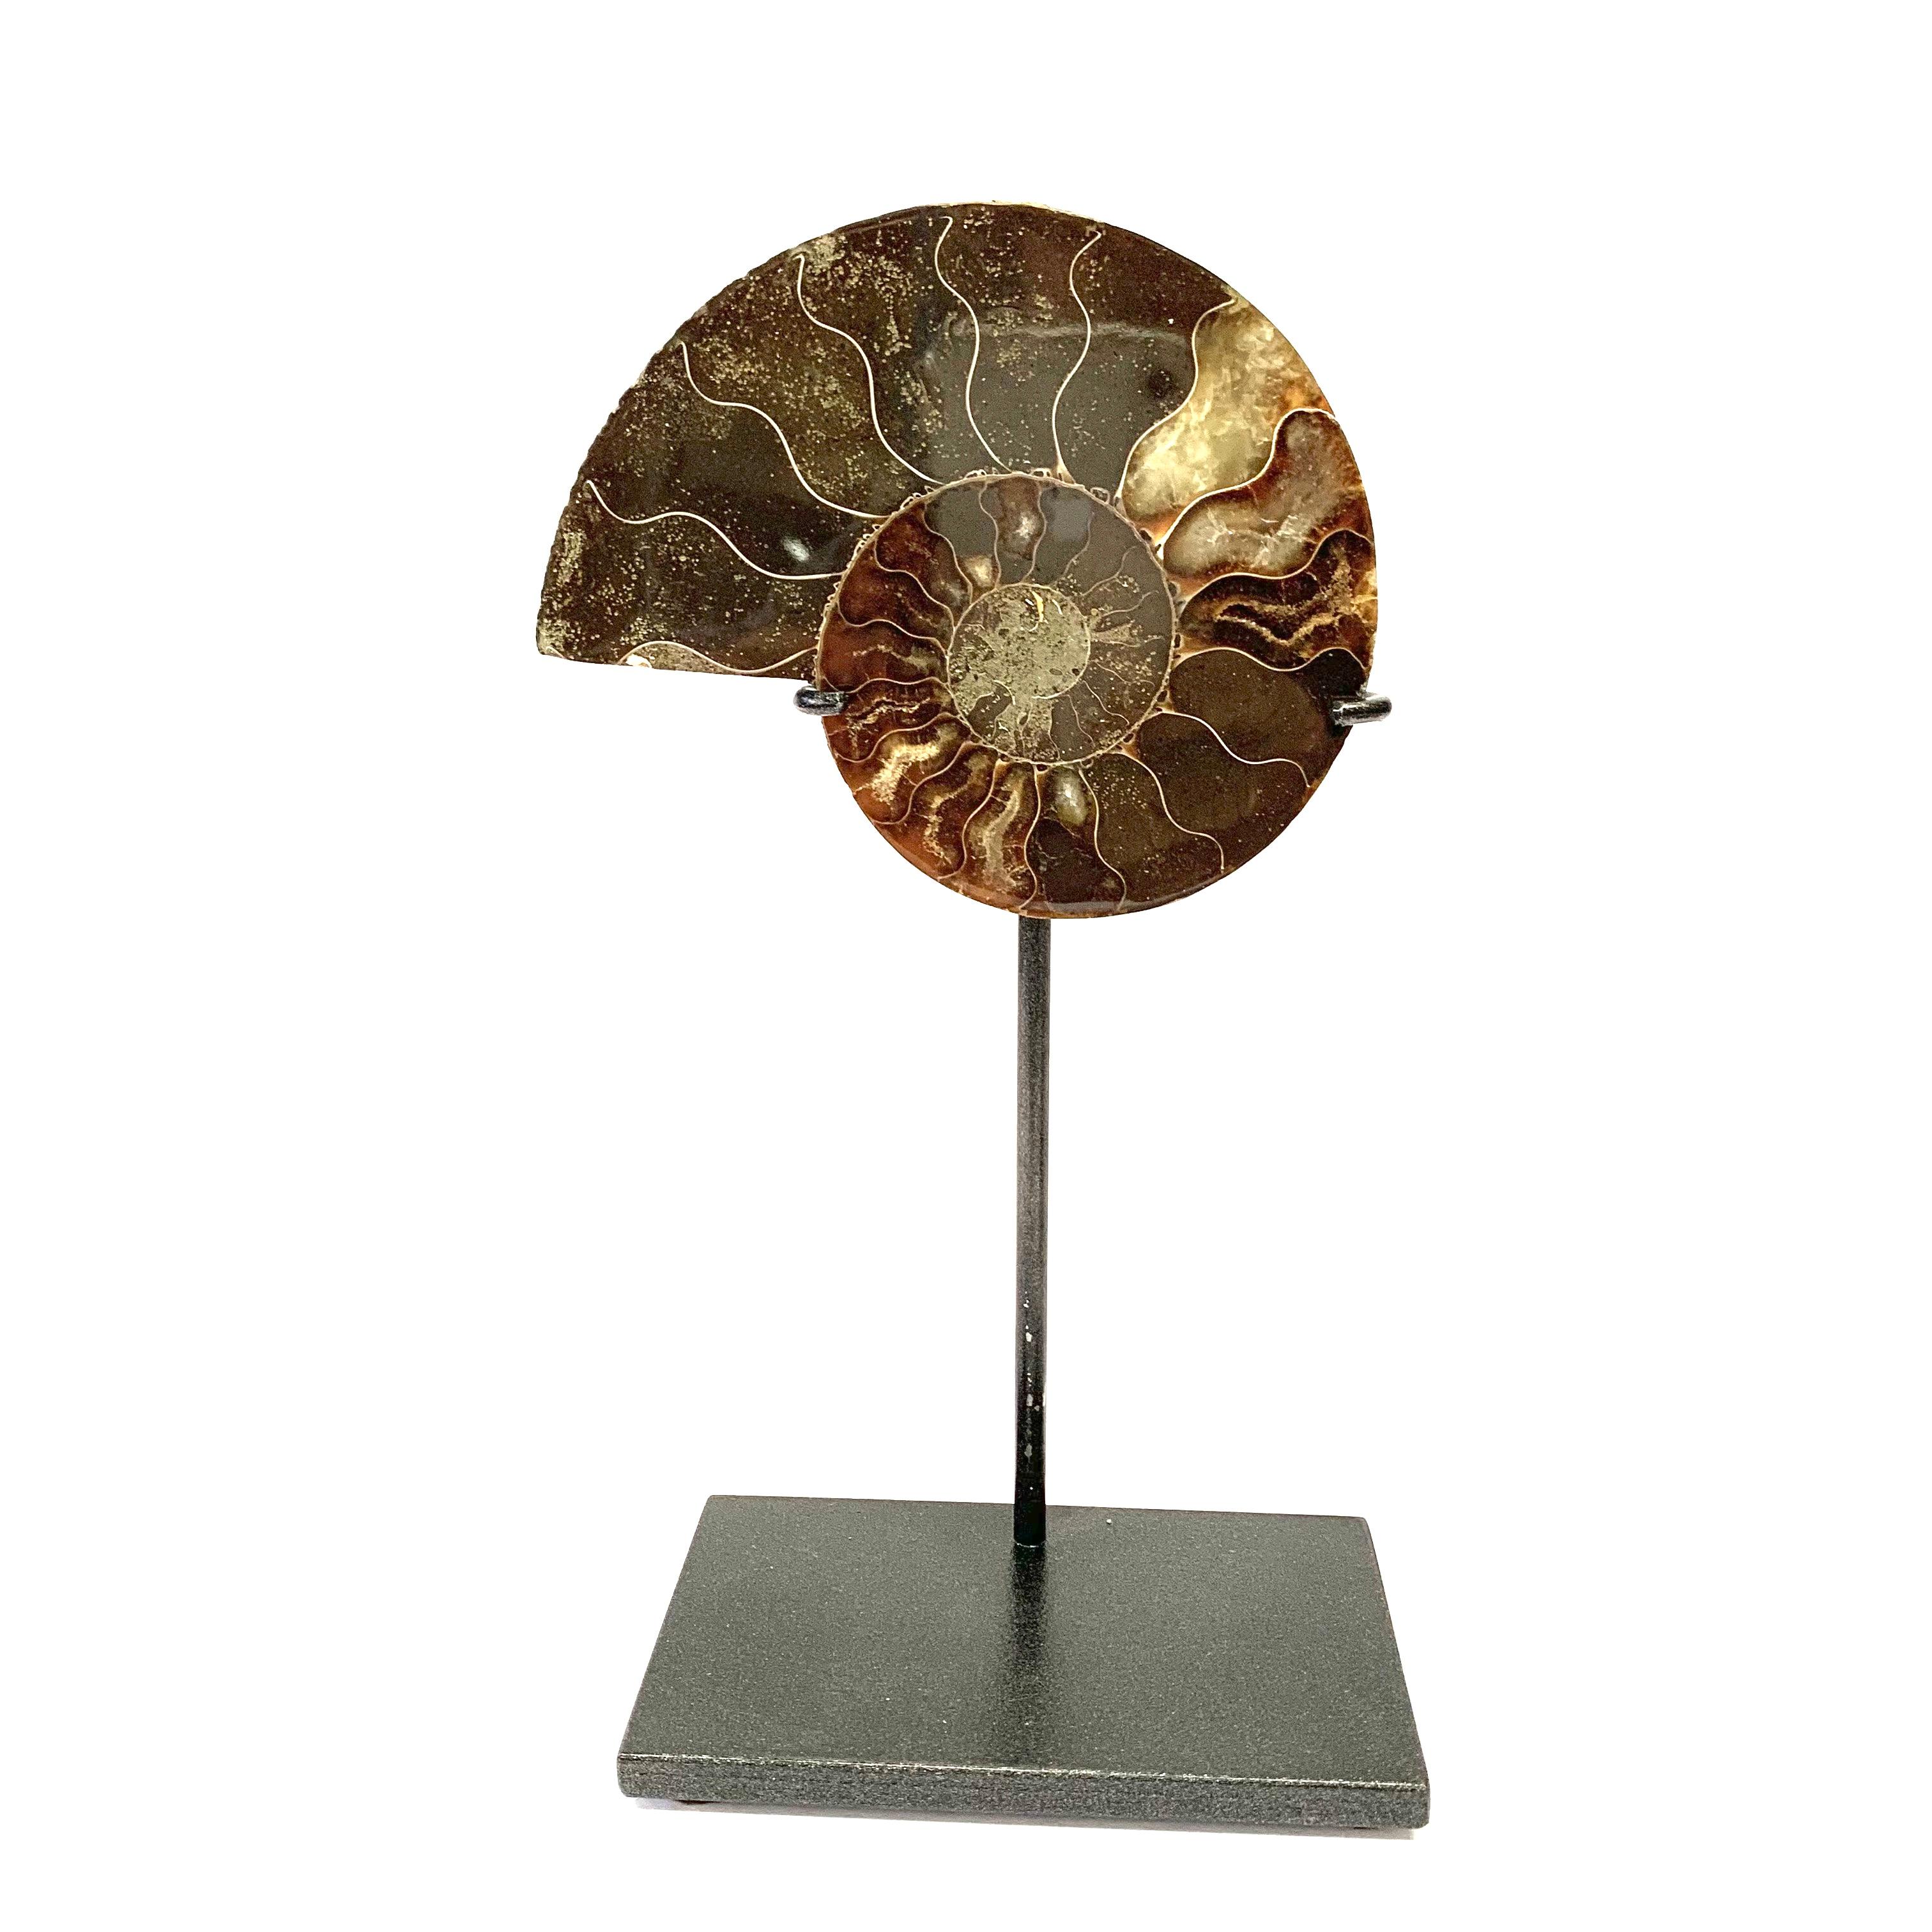 Pair of polished ammonite sculptures from Madagascar
Custom steel stand
One of many from a large collection.
Ammonite A 4.25